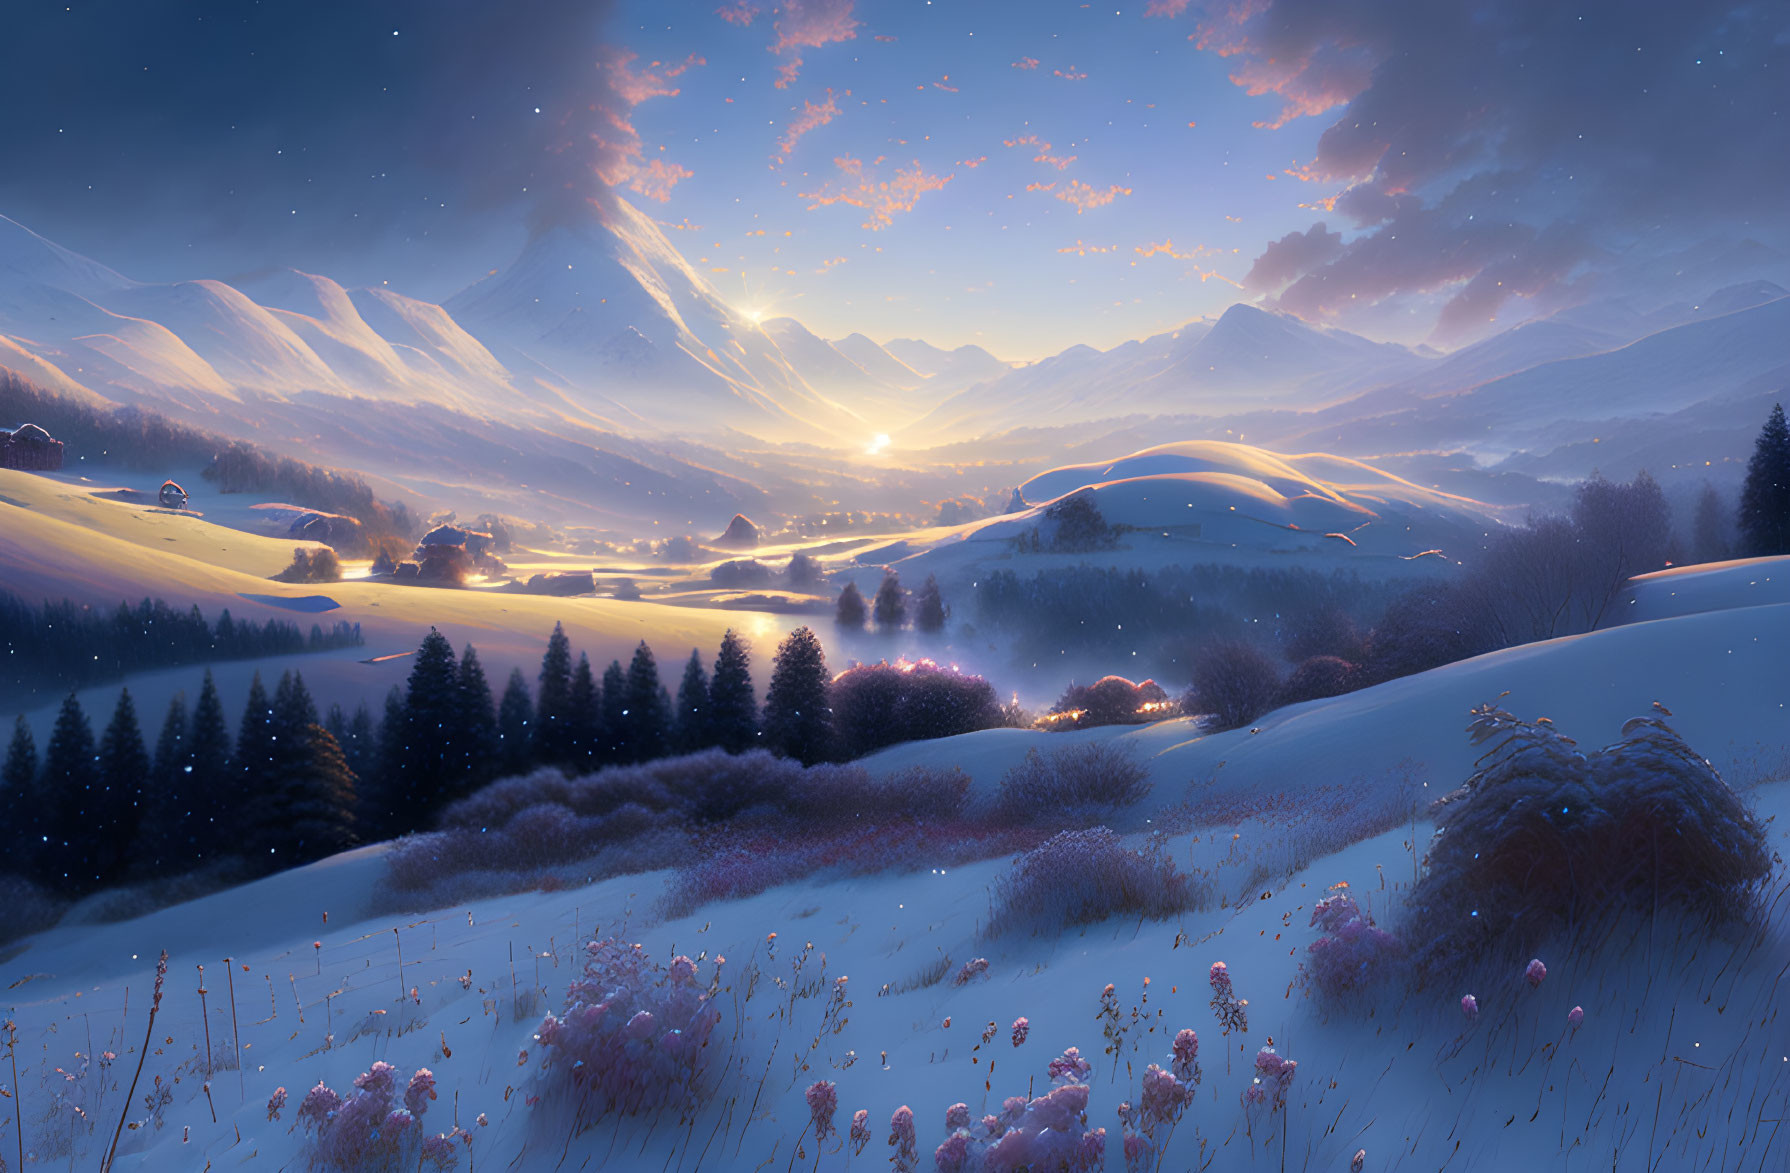 Snow-covered hills and village at sunrise in serene winter landscape